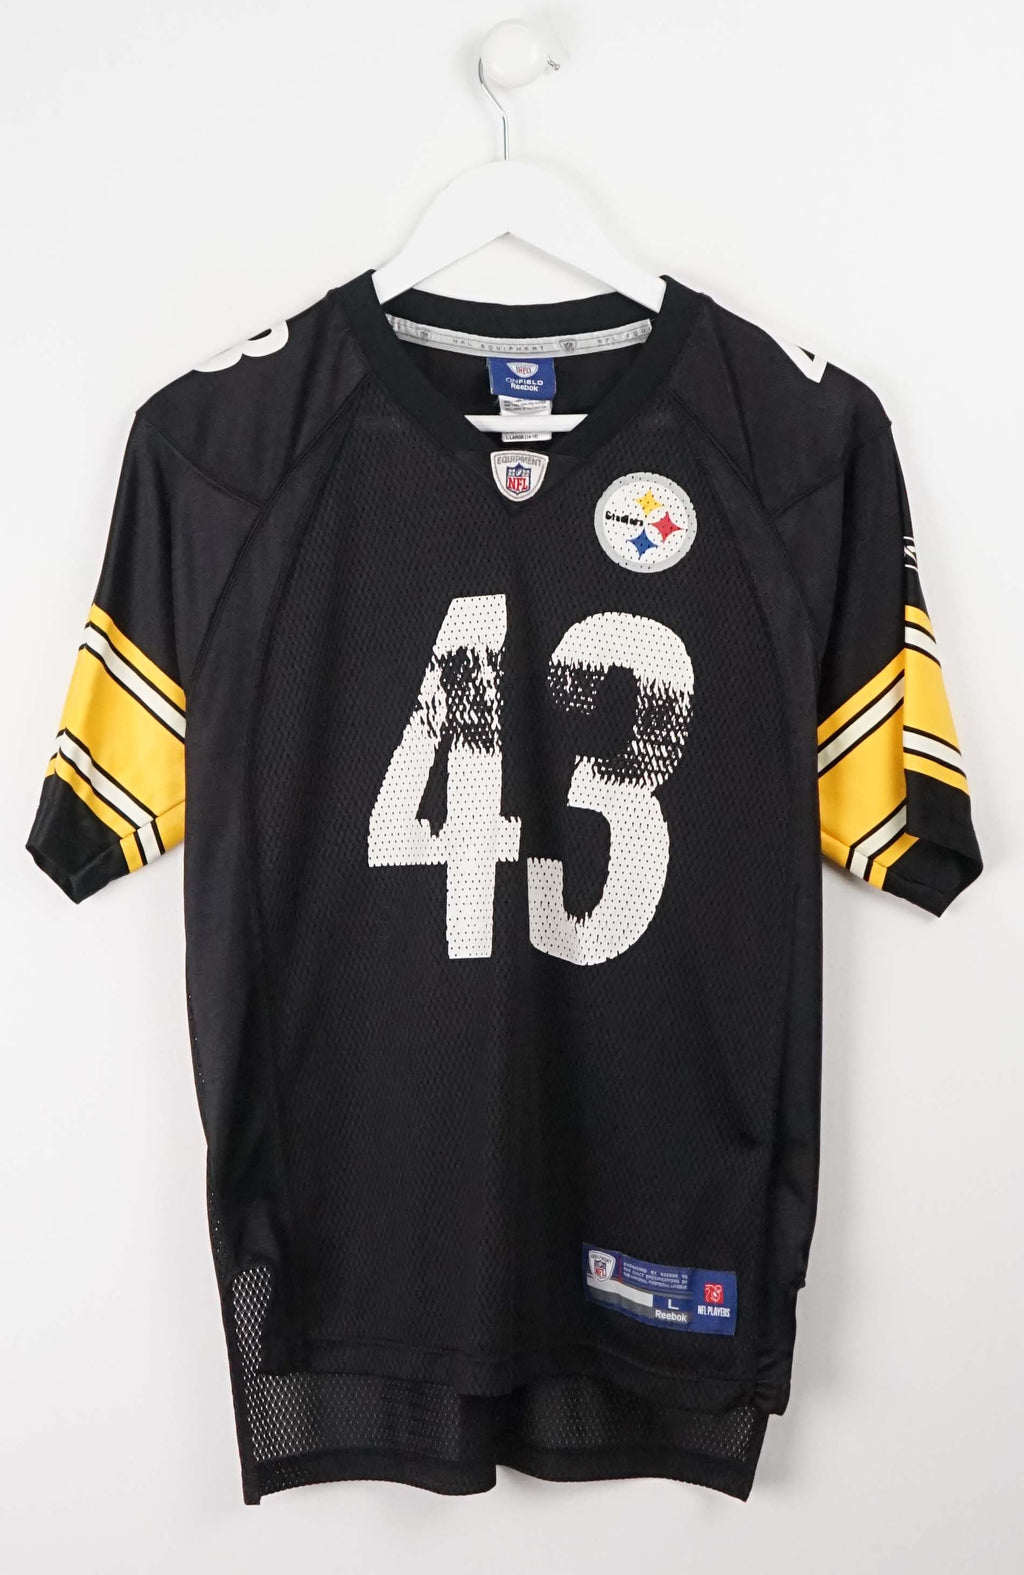 VINTAGE NFL PITTSBURGH STEELERS JERSEY (XS)